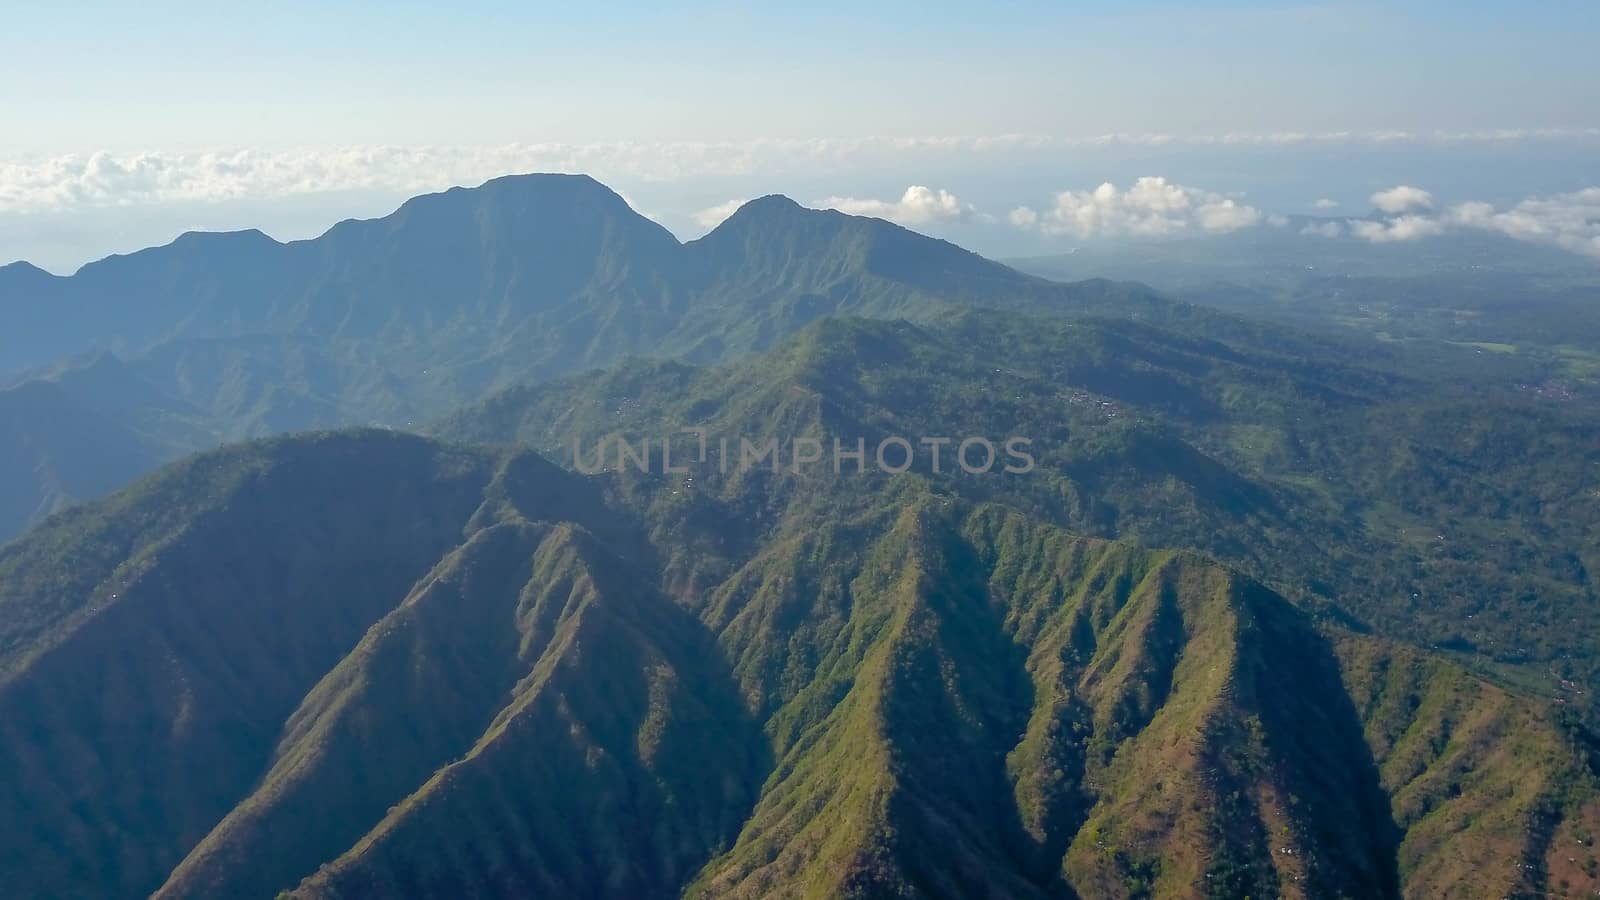 Mountainous landscape of Amed village. Aerial view of the mountains above the village, Bali, Indonesia. Lempuyang and Seraya mountains. Breathtaking panoramic view of the mountains in the tropics.